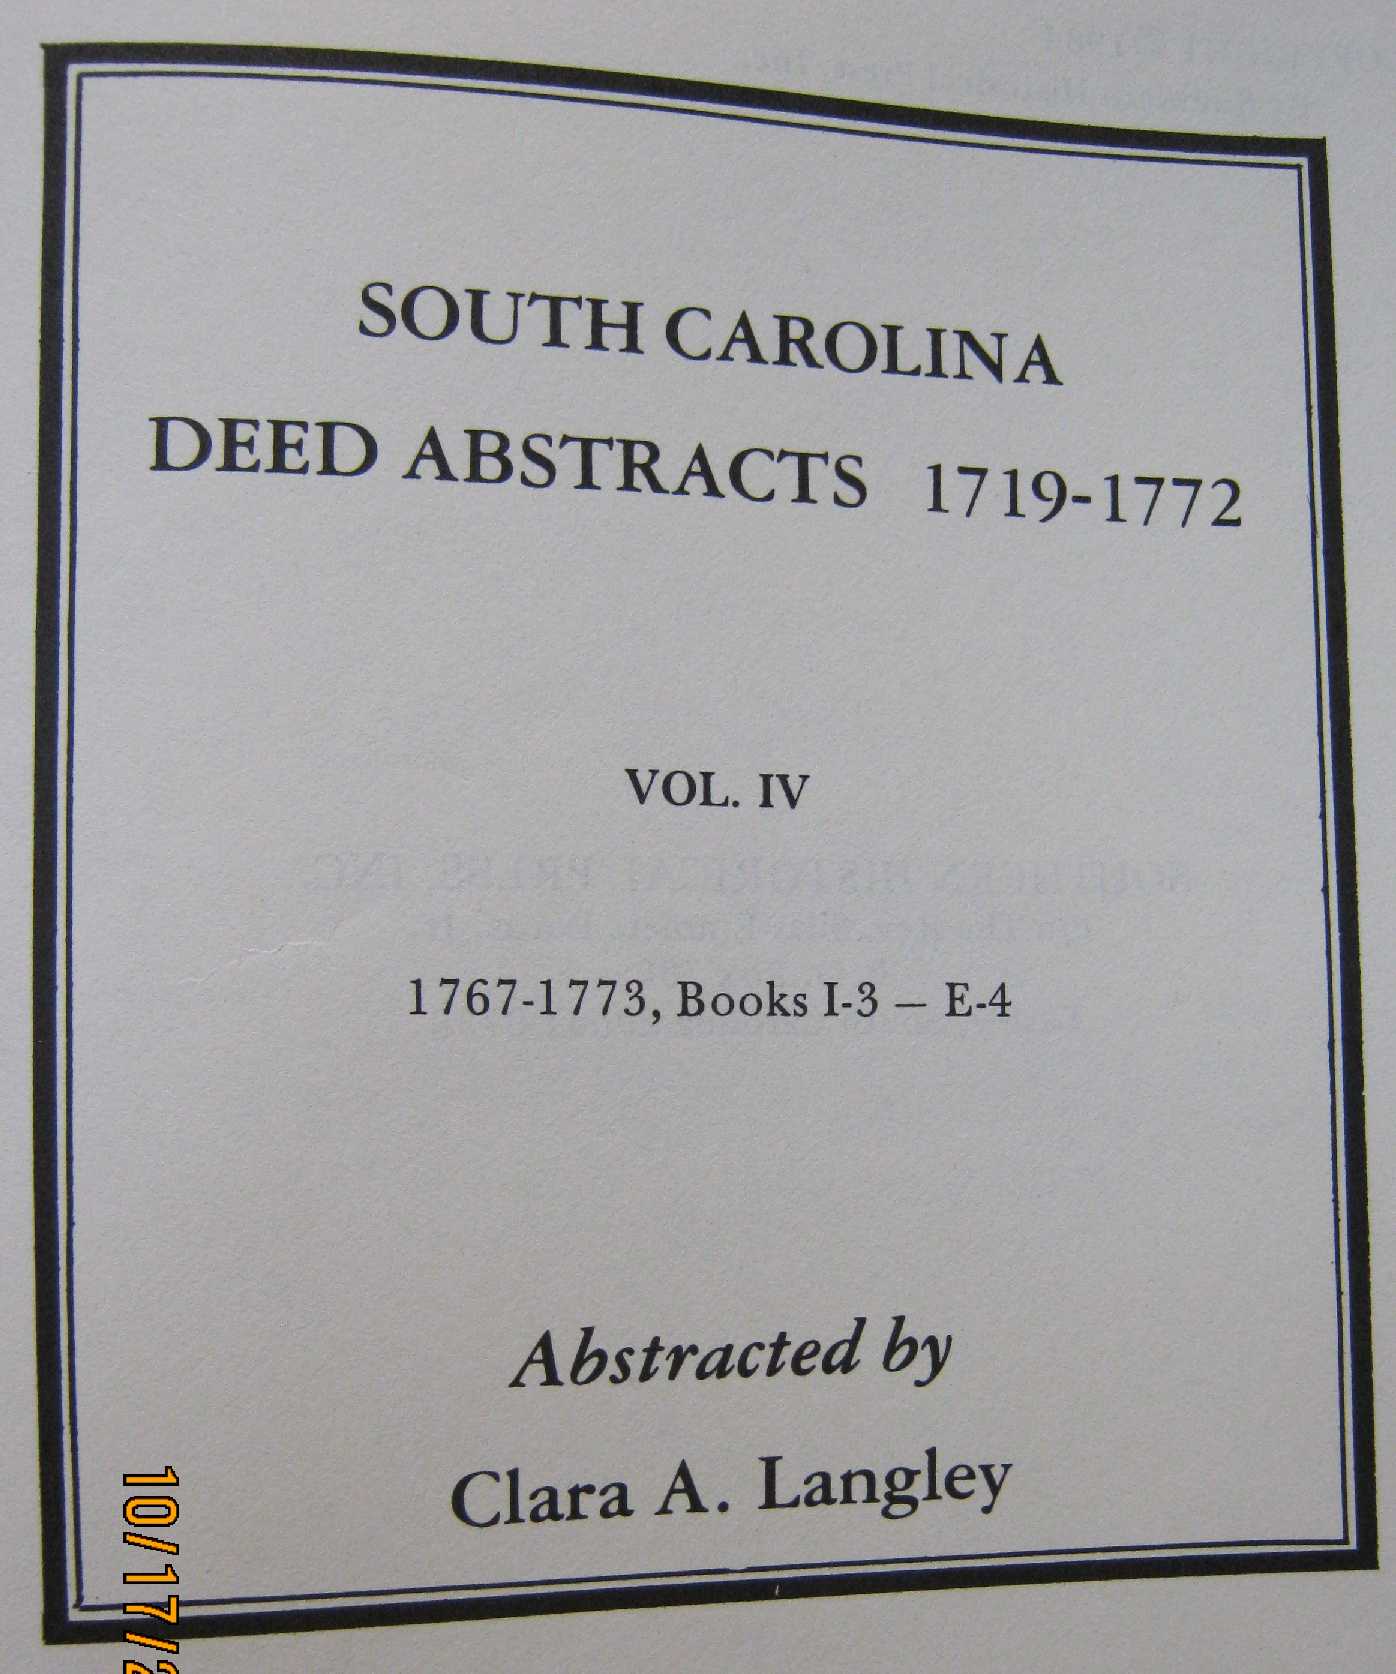 Deed Abstracts SC  1719-1772 Title page